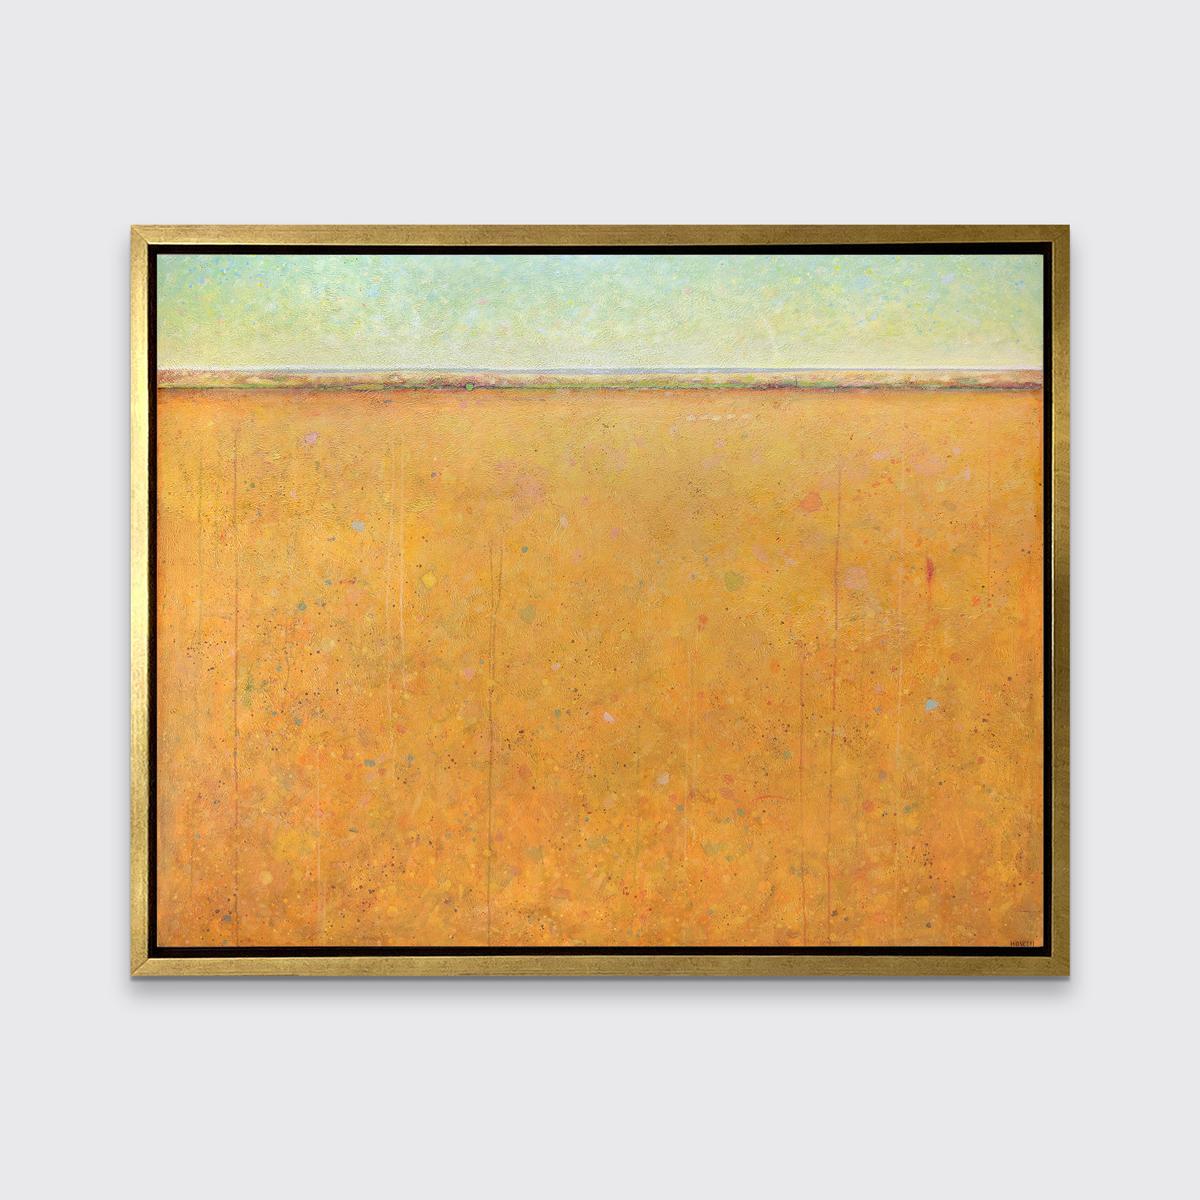 This limited edition print is an abstract landscape by Elwood Howell. It features a high horizon line - deep yellow orange with muted red, green, and yellow organic shapes are beneath the line, while above it, muted yellow fades to green. 

An